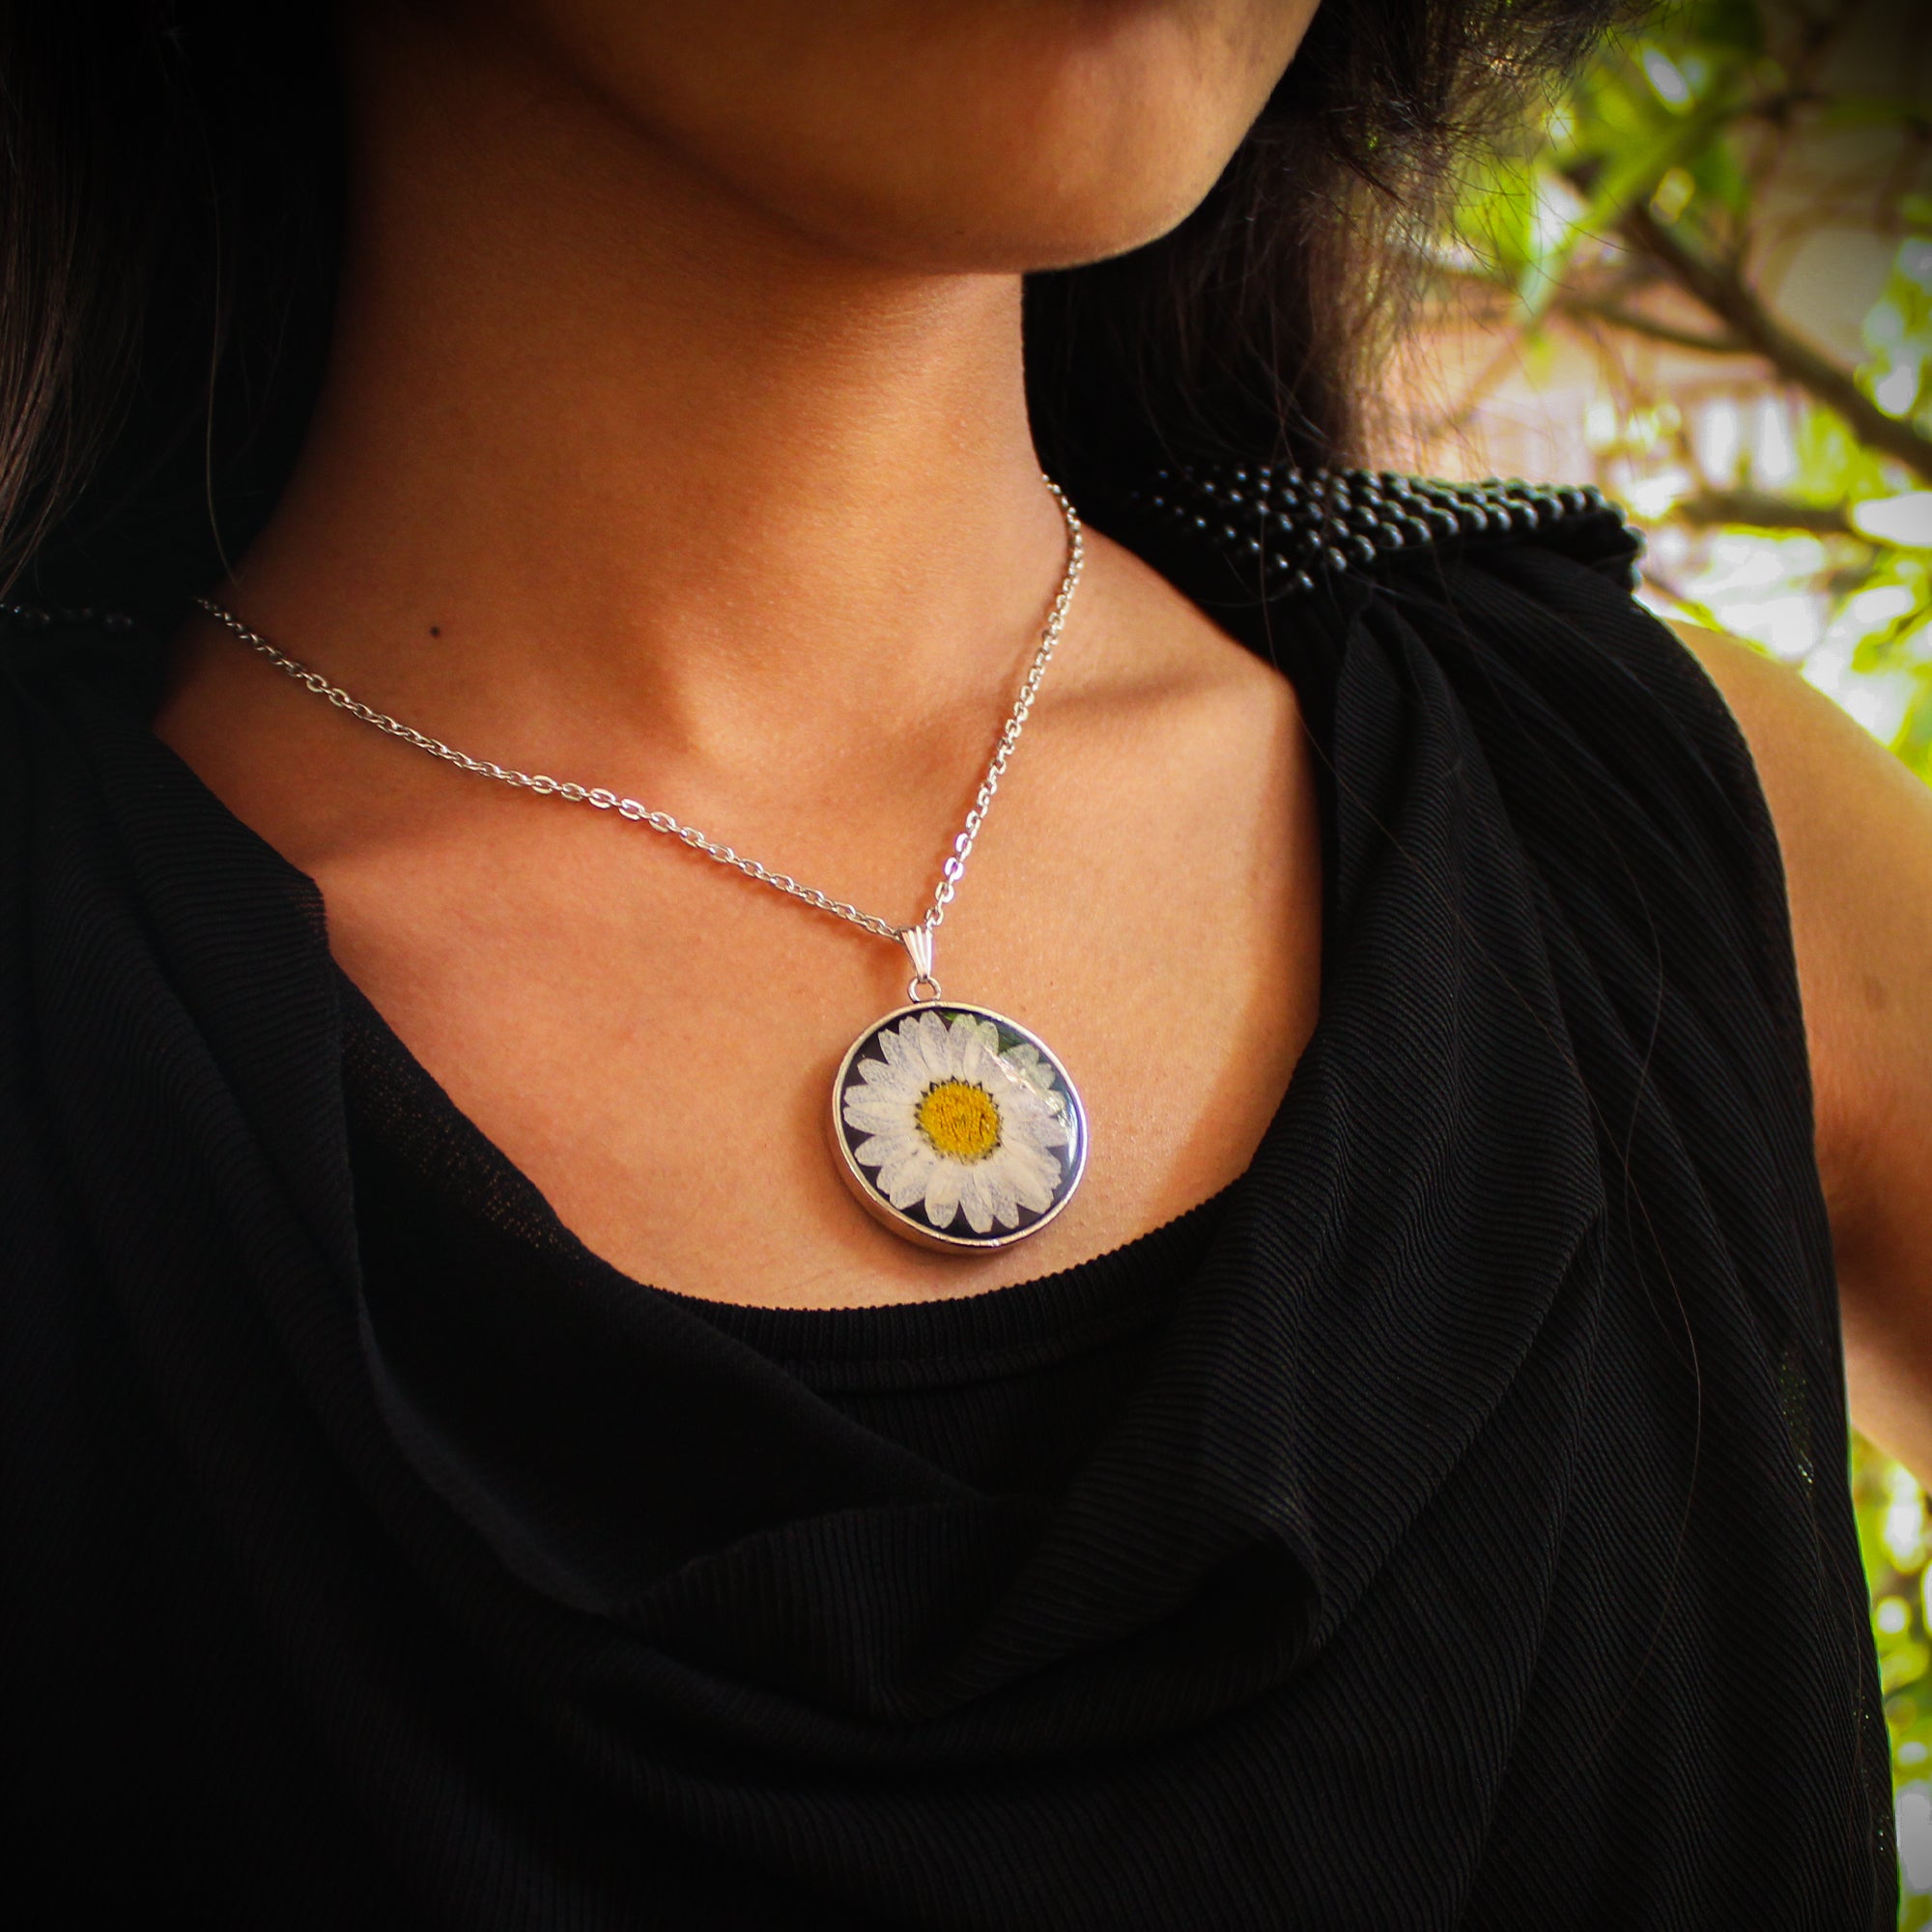 Eclipse Black Real Dried Daisy Flower Necklace